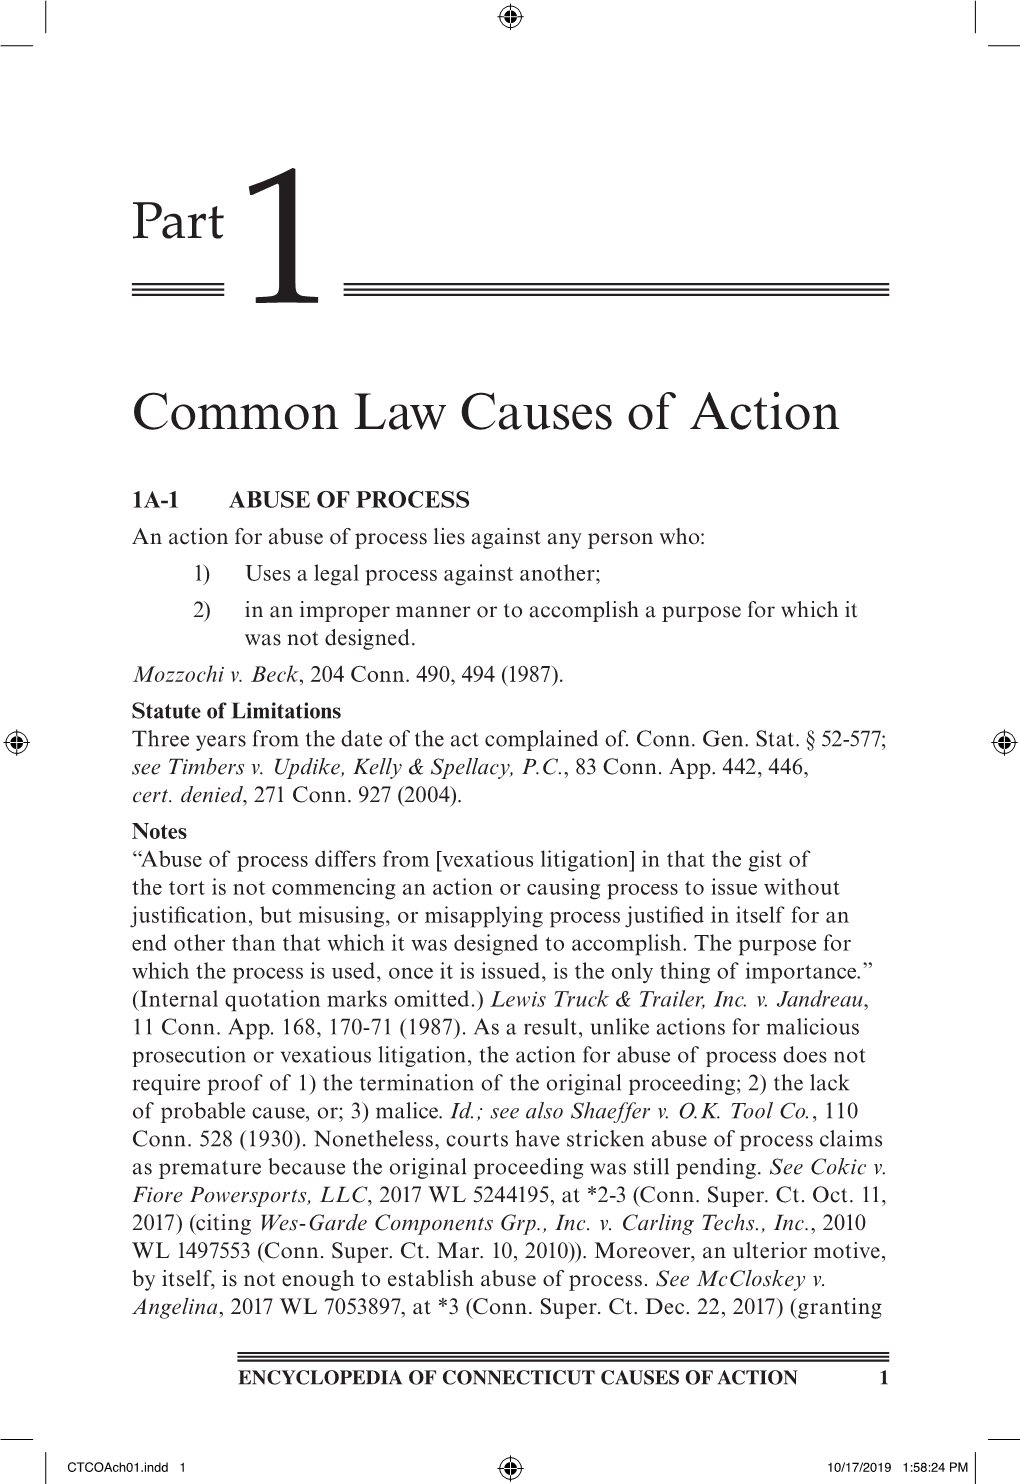 Part 1 Common Law Causes of Action